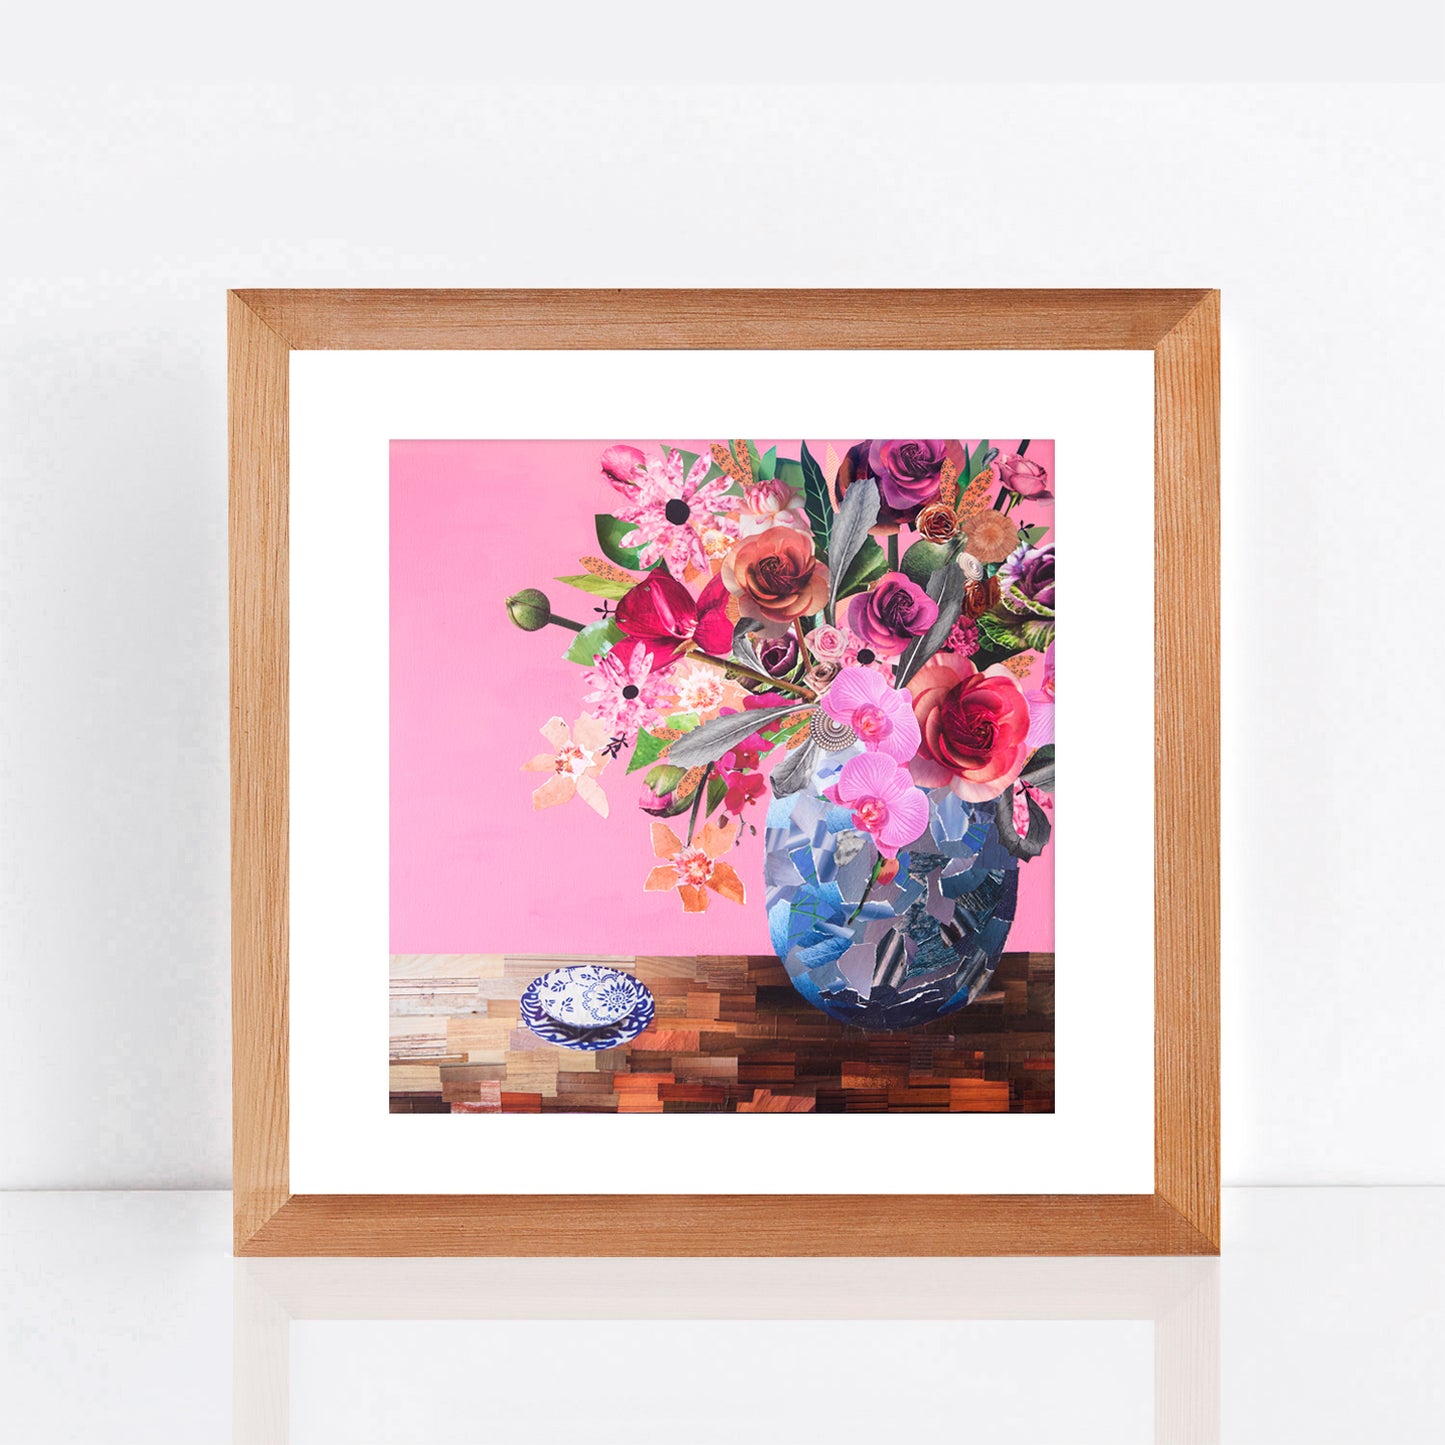 print in frame of a collage artwork made from magazine scraps, vintage botanicals and flower photography with pink background